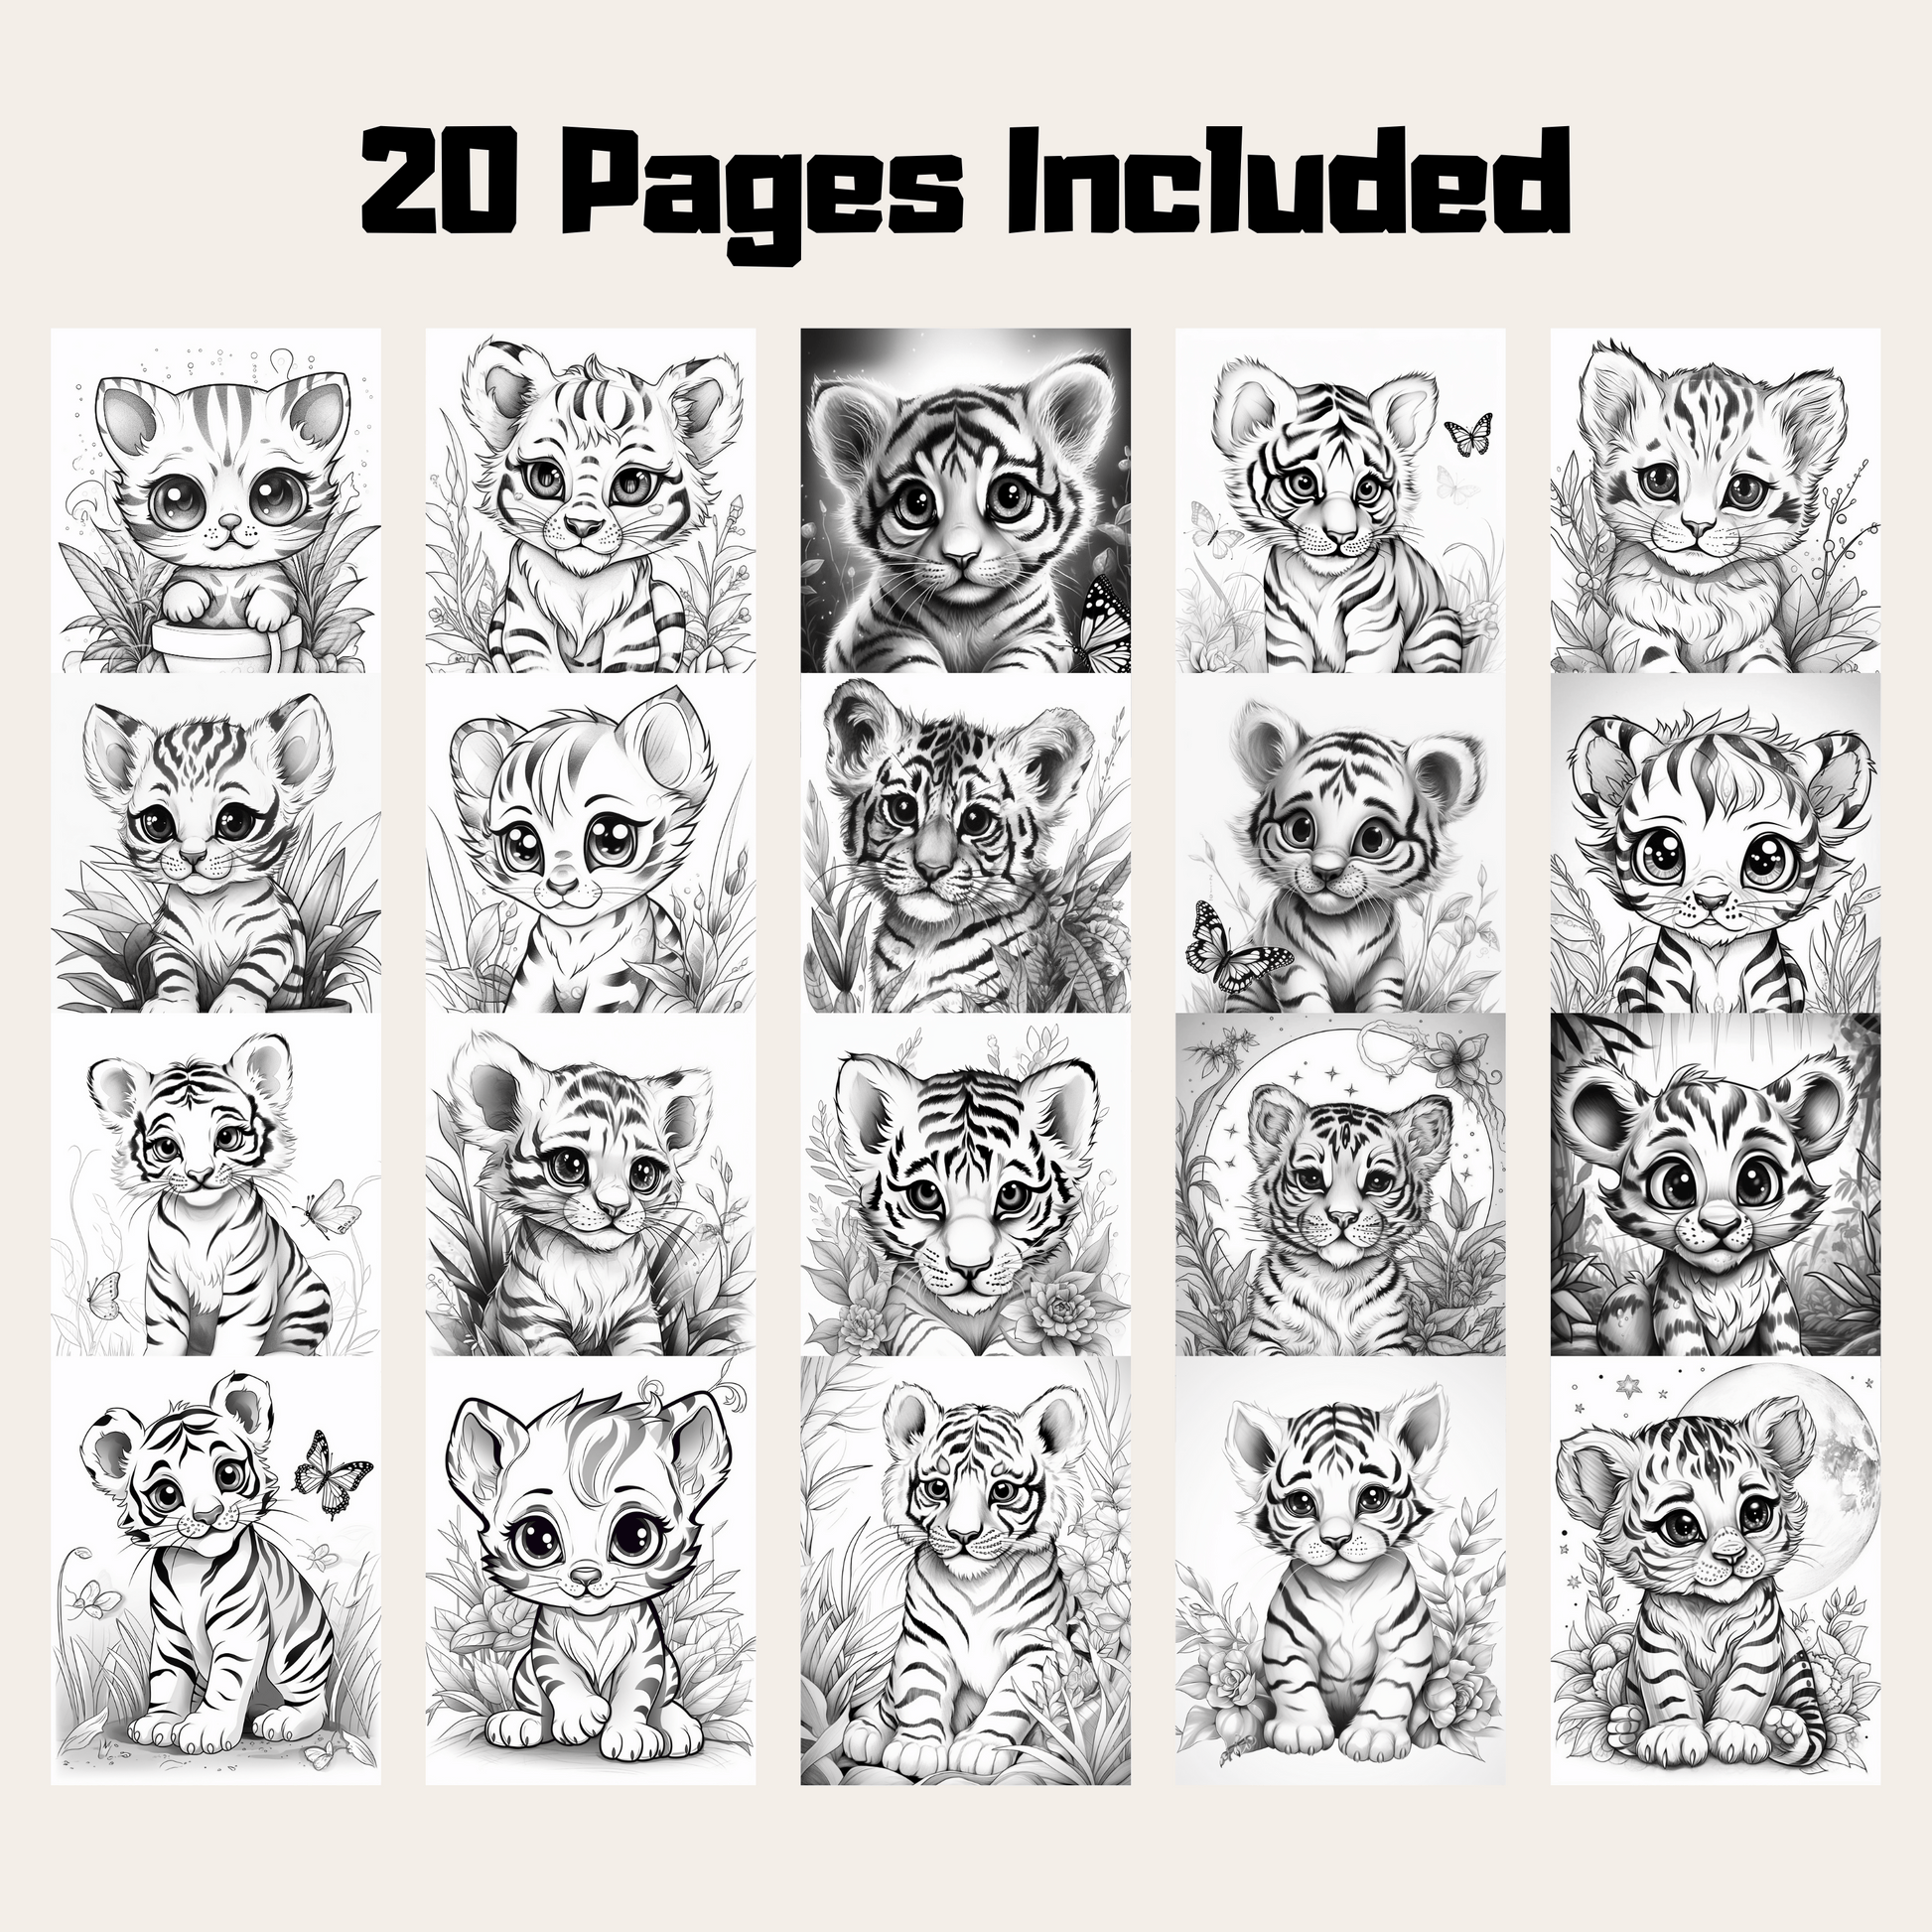 Pages adorable baby tiger coloring book instant download printabl â funny print for you